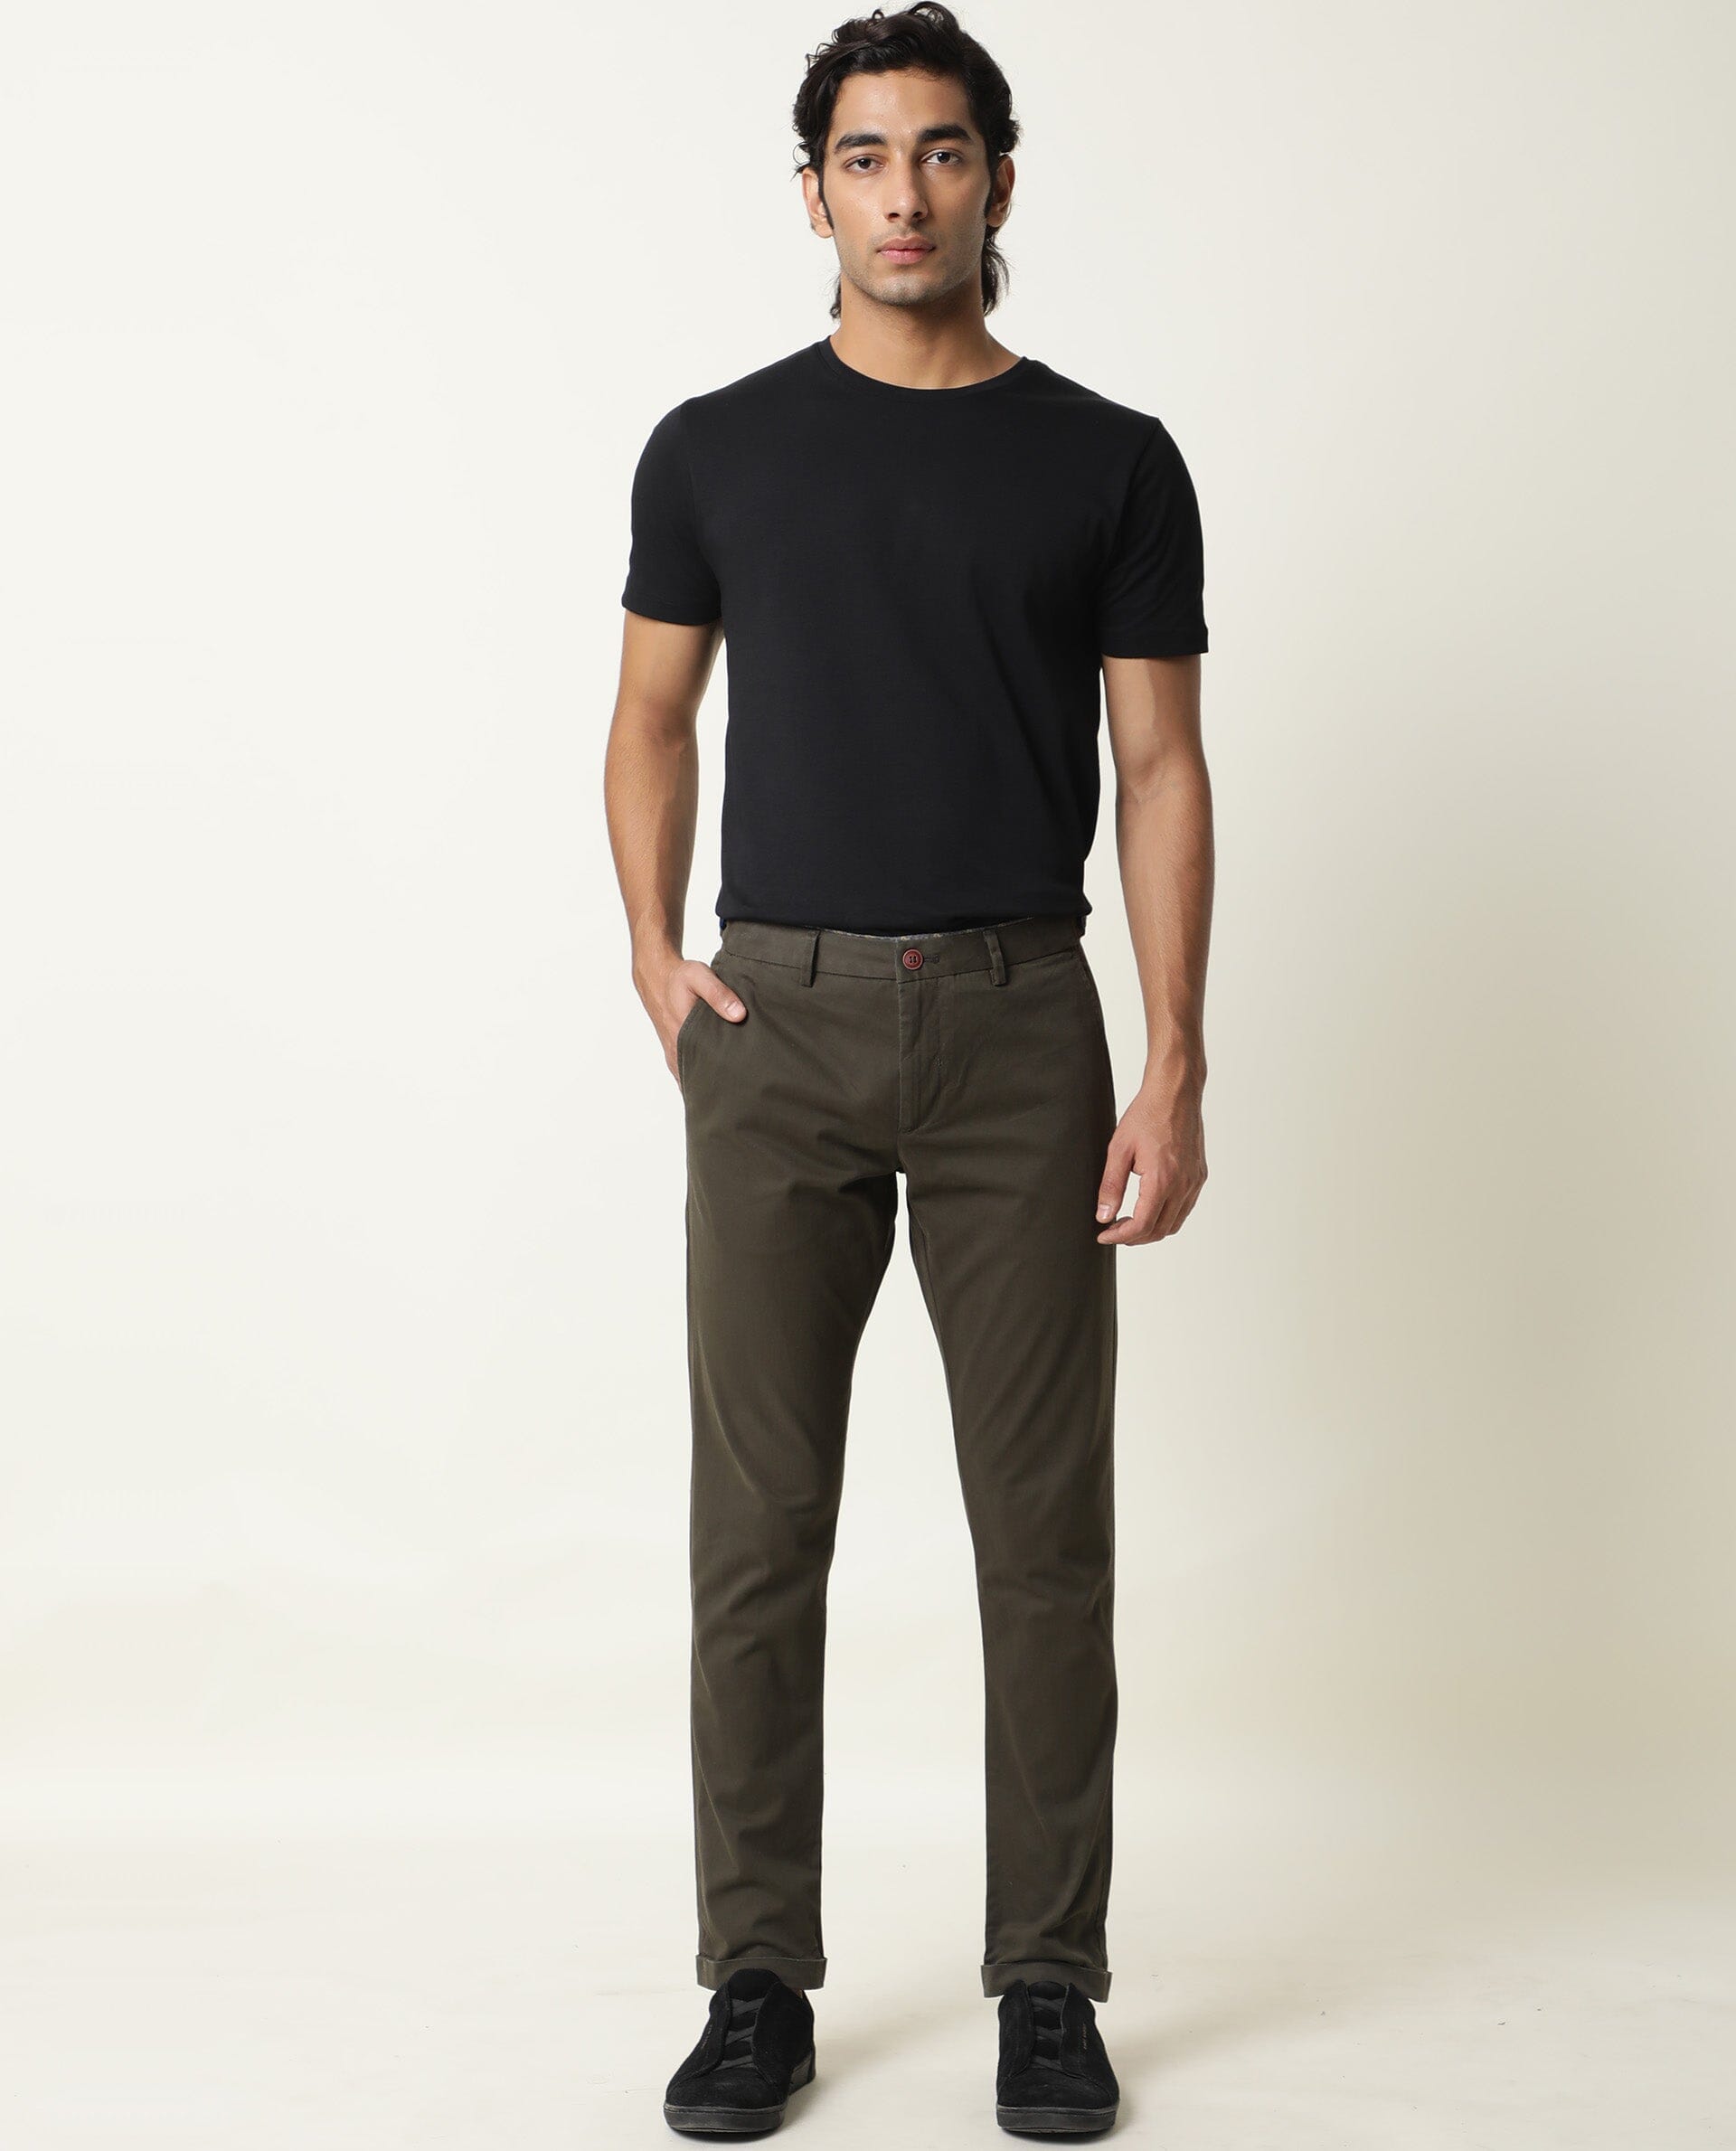 Louis Philippe Sport Trousers & Chinos, for Men at Louisphilippe.com